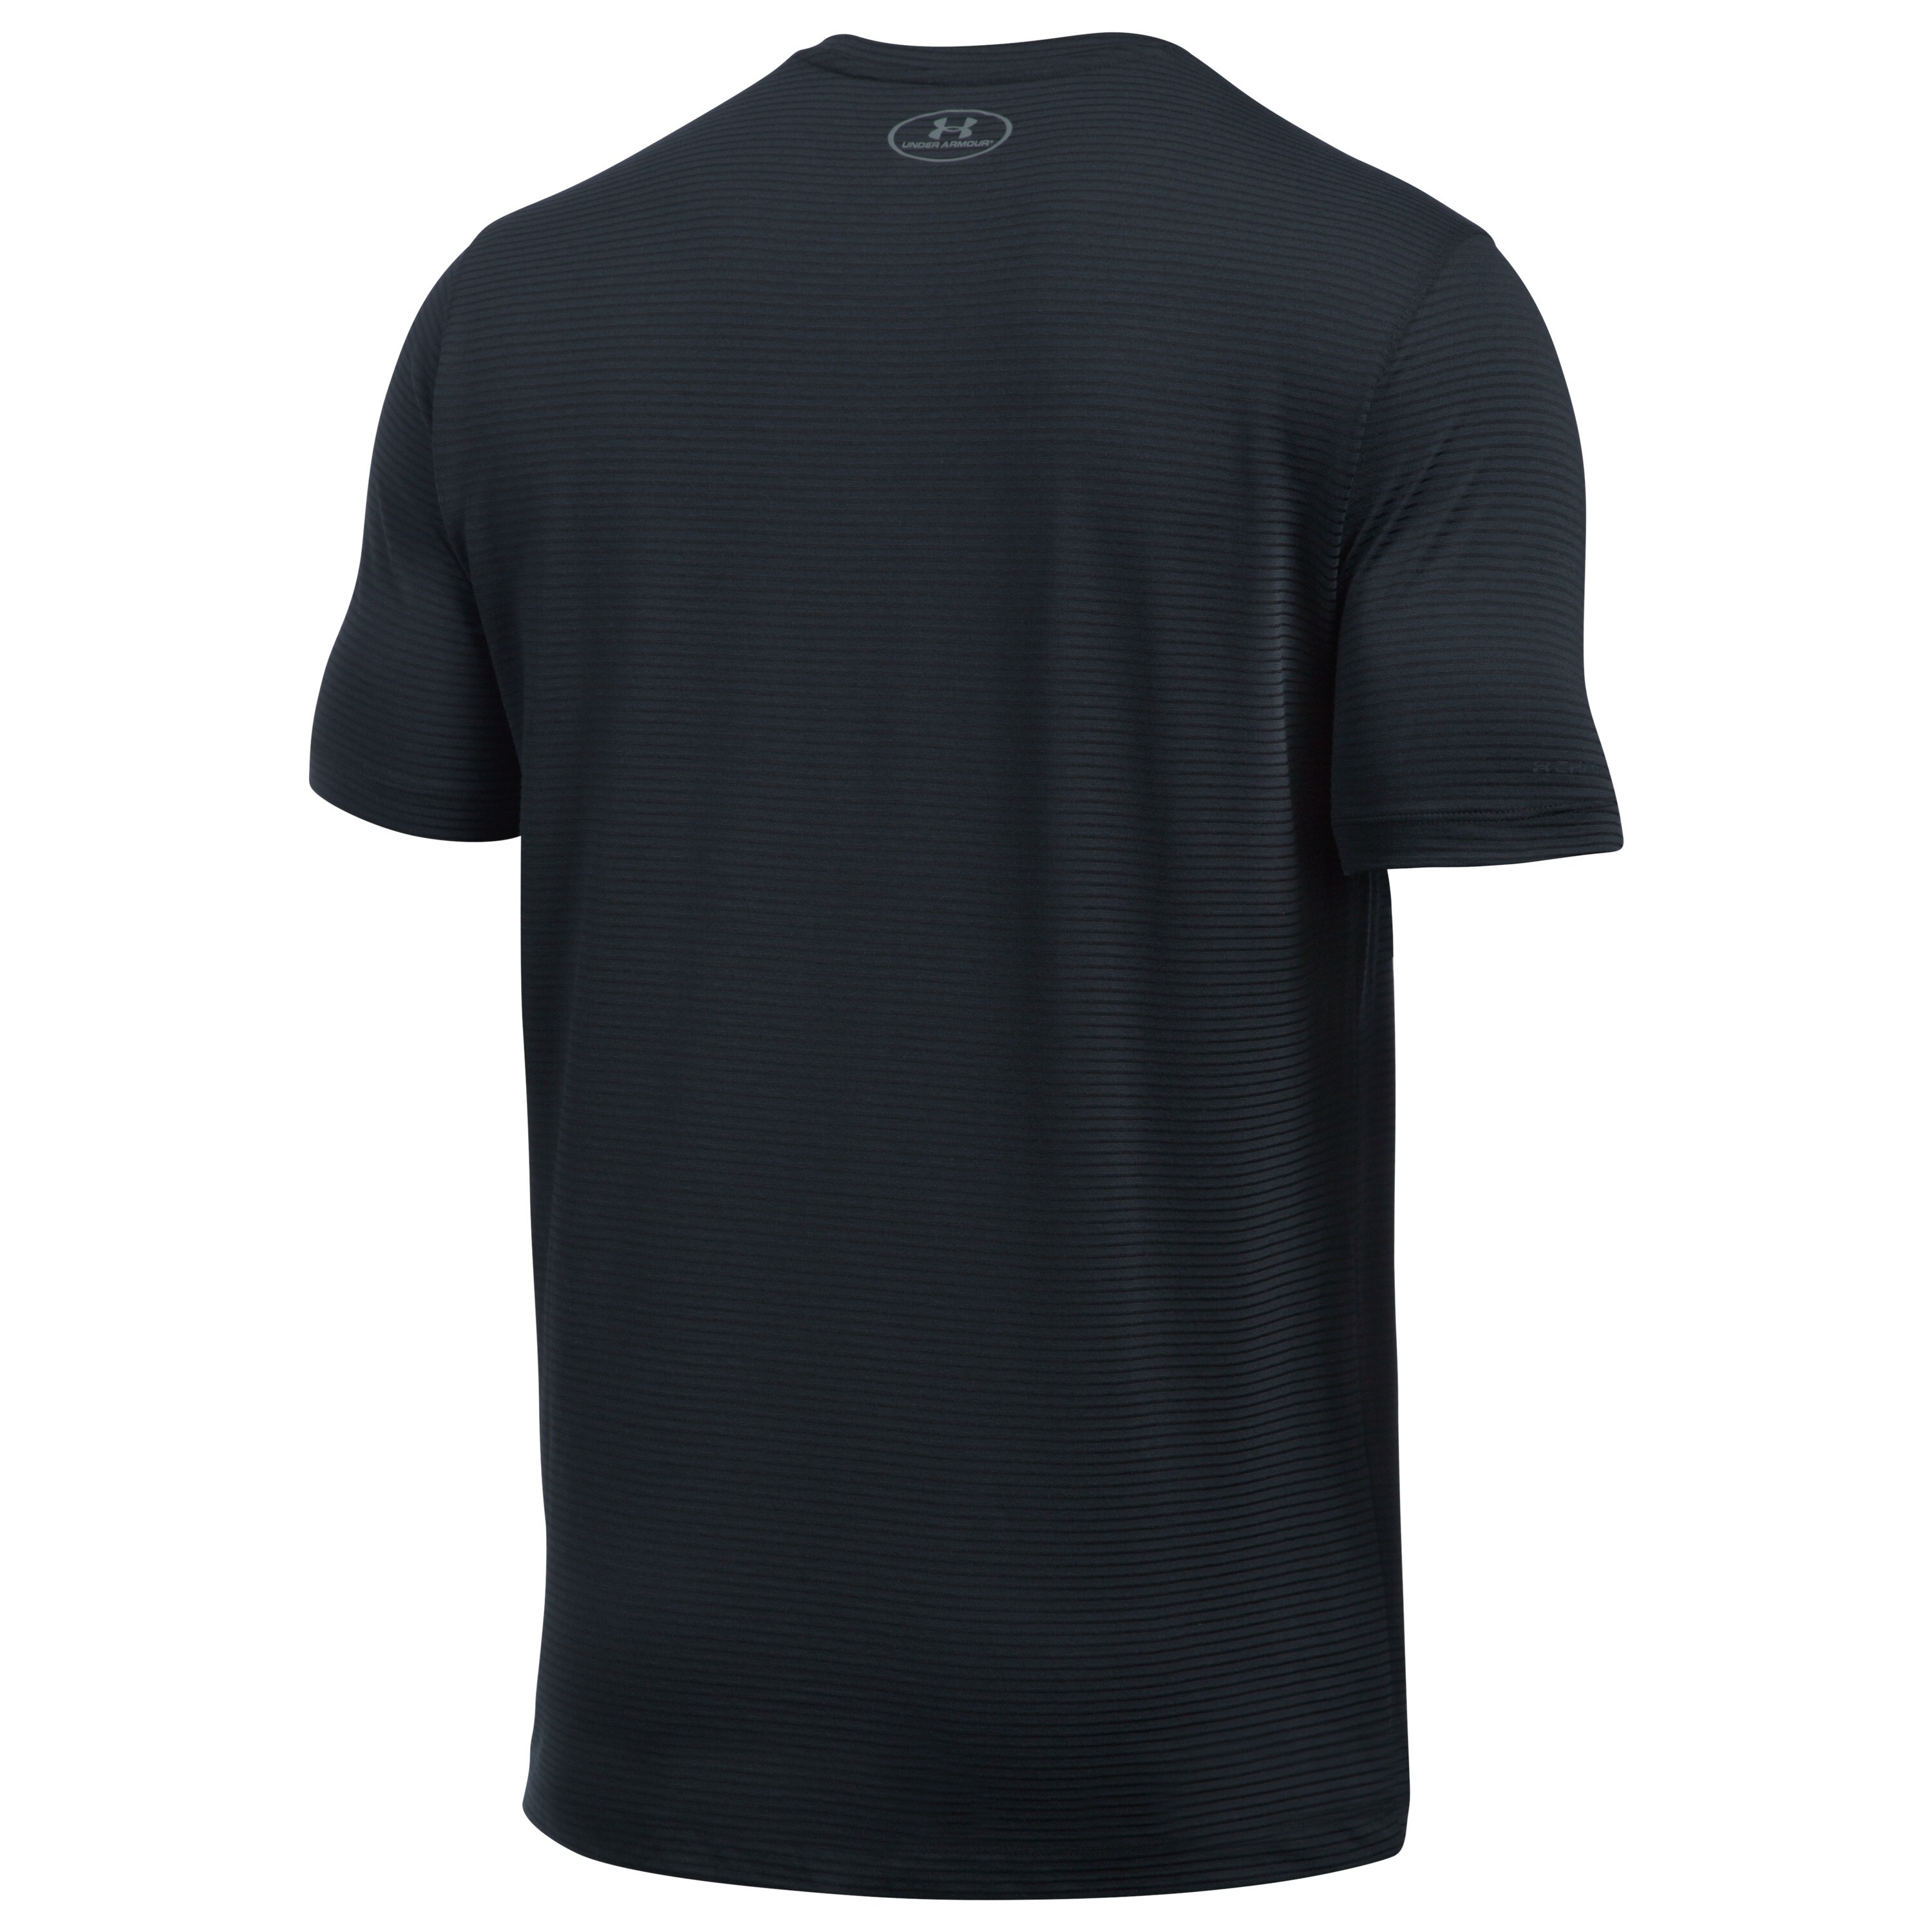 Under Armour Fitness T-Shirt Charged Cotton black graphite